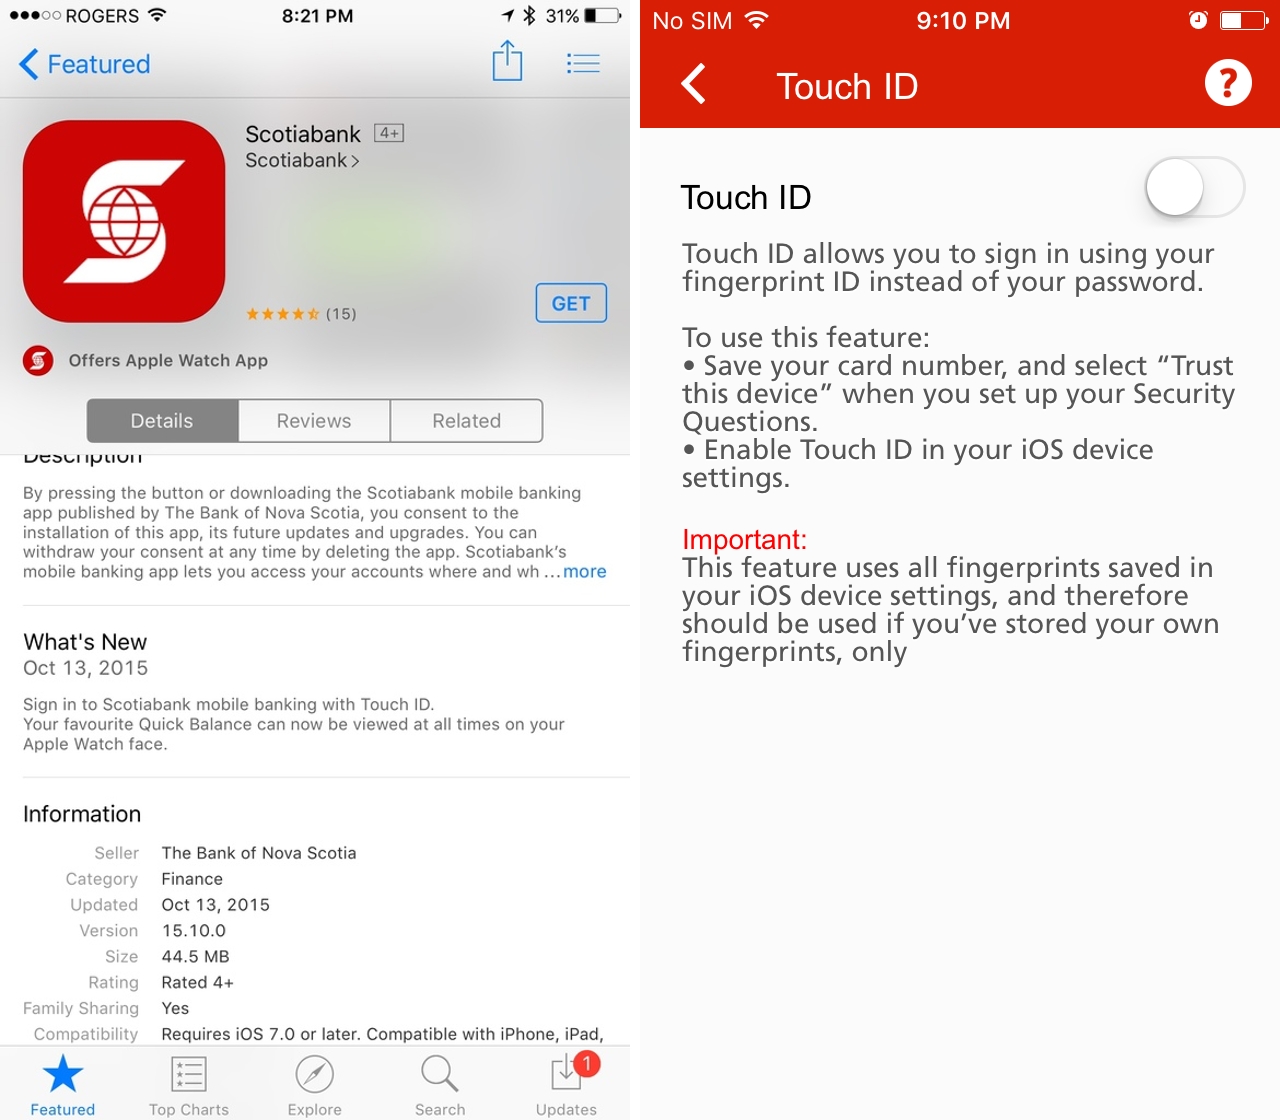 Scotiabank iOS Touch ID